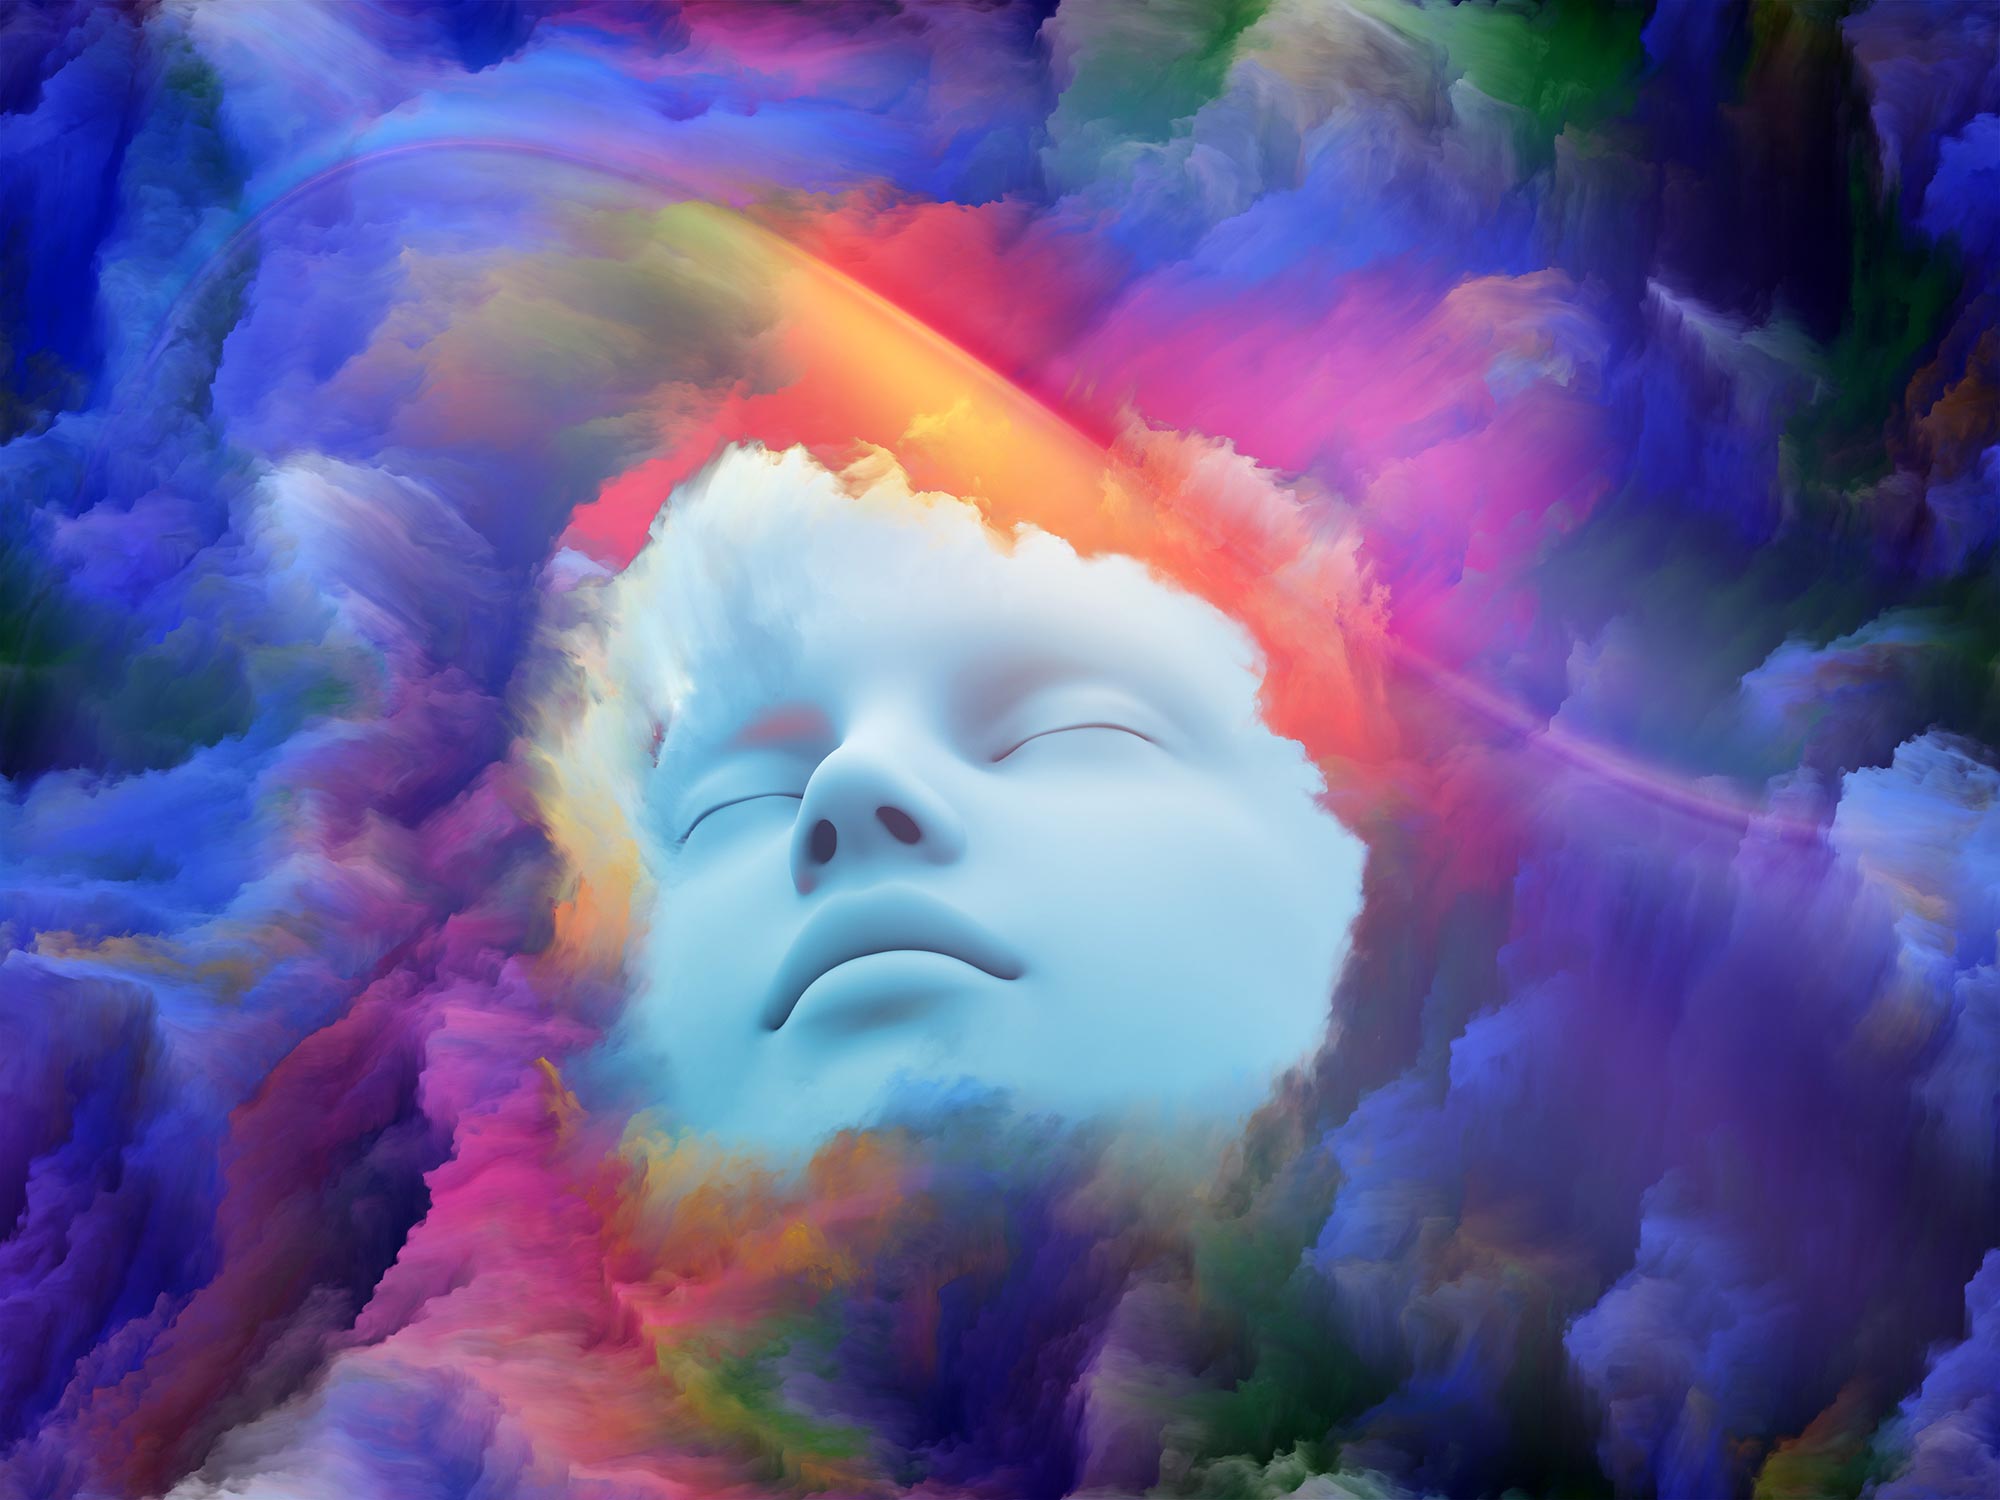 Johns Hopkins Researchers Explore the Psychedelic Transformation of Beliefs